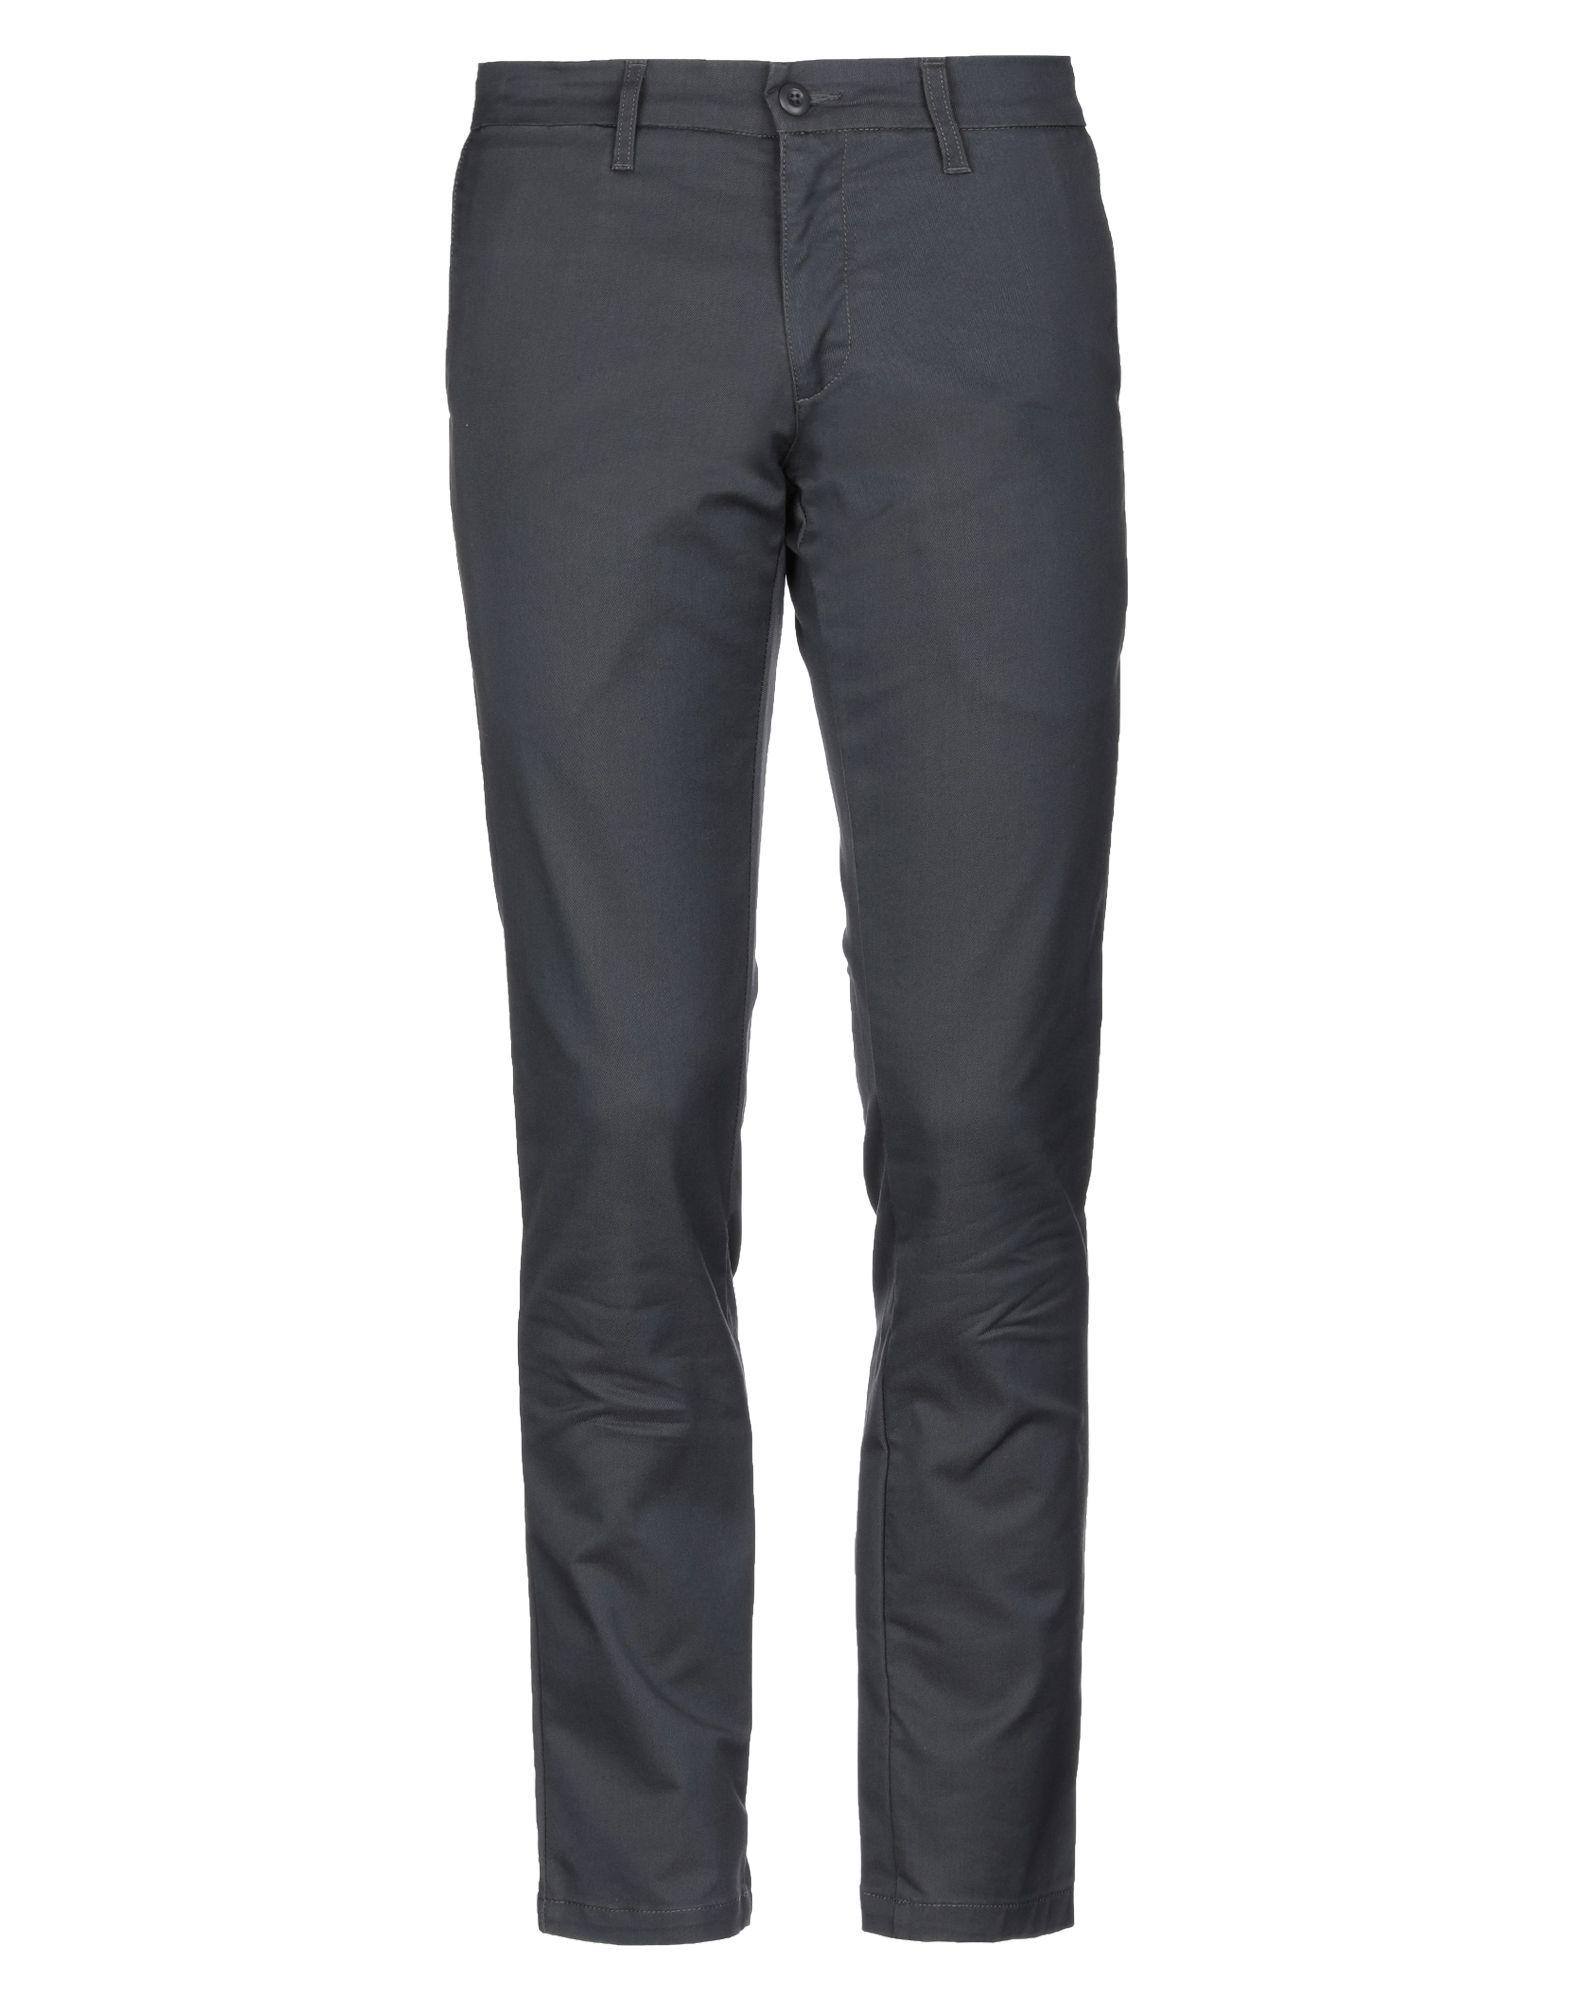 Carhartt Casual Pants in Gray for Men - Lyst